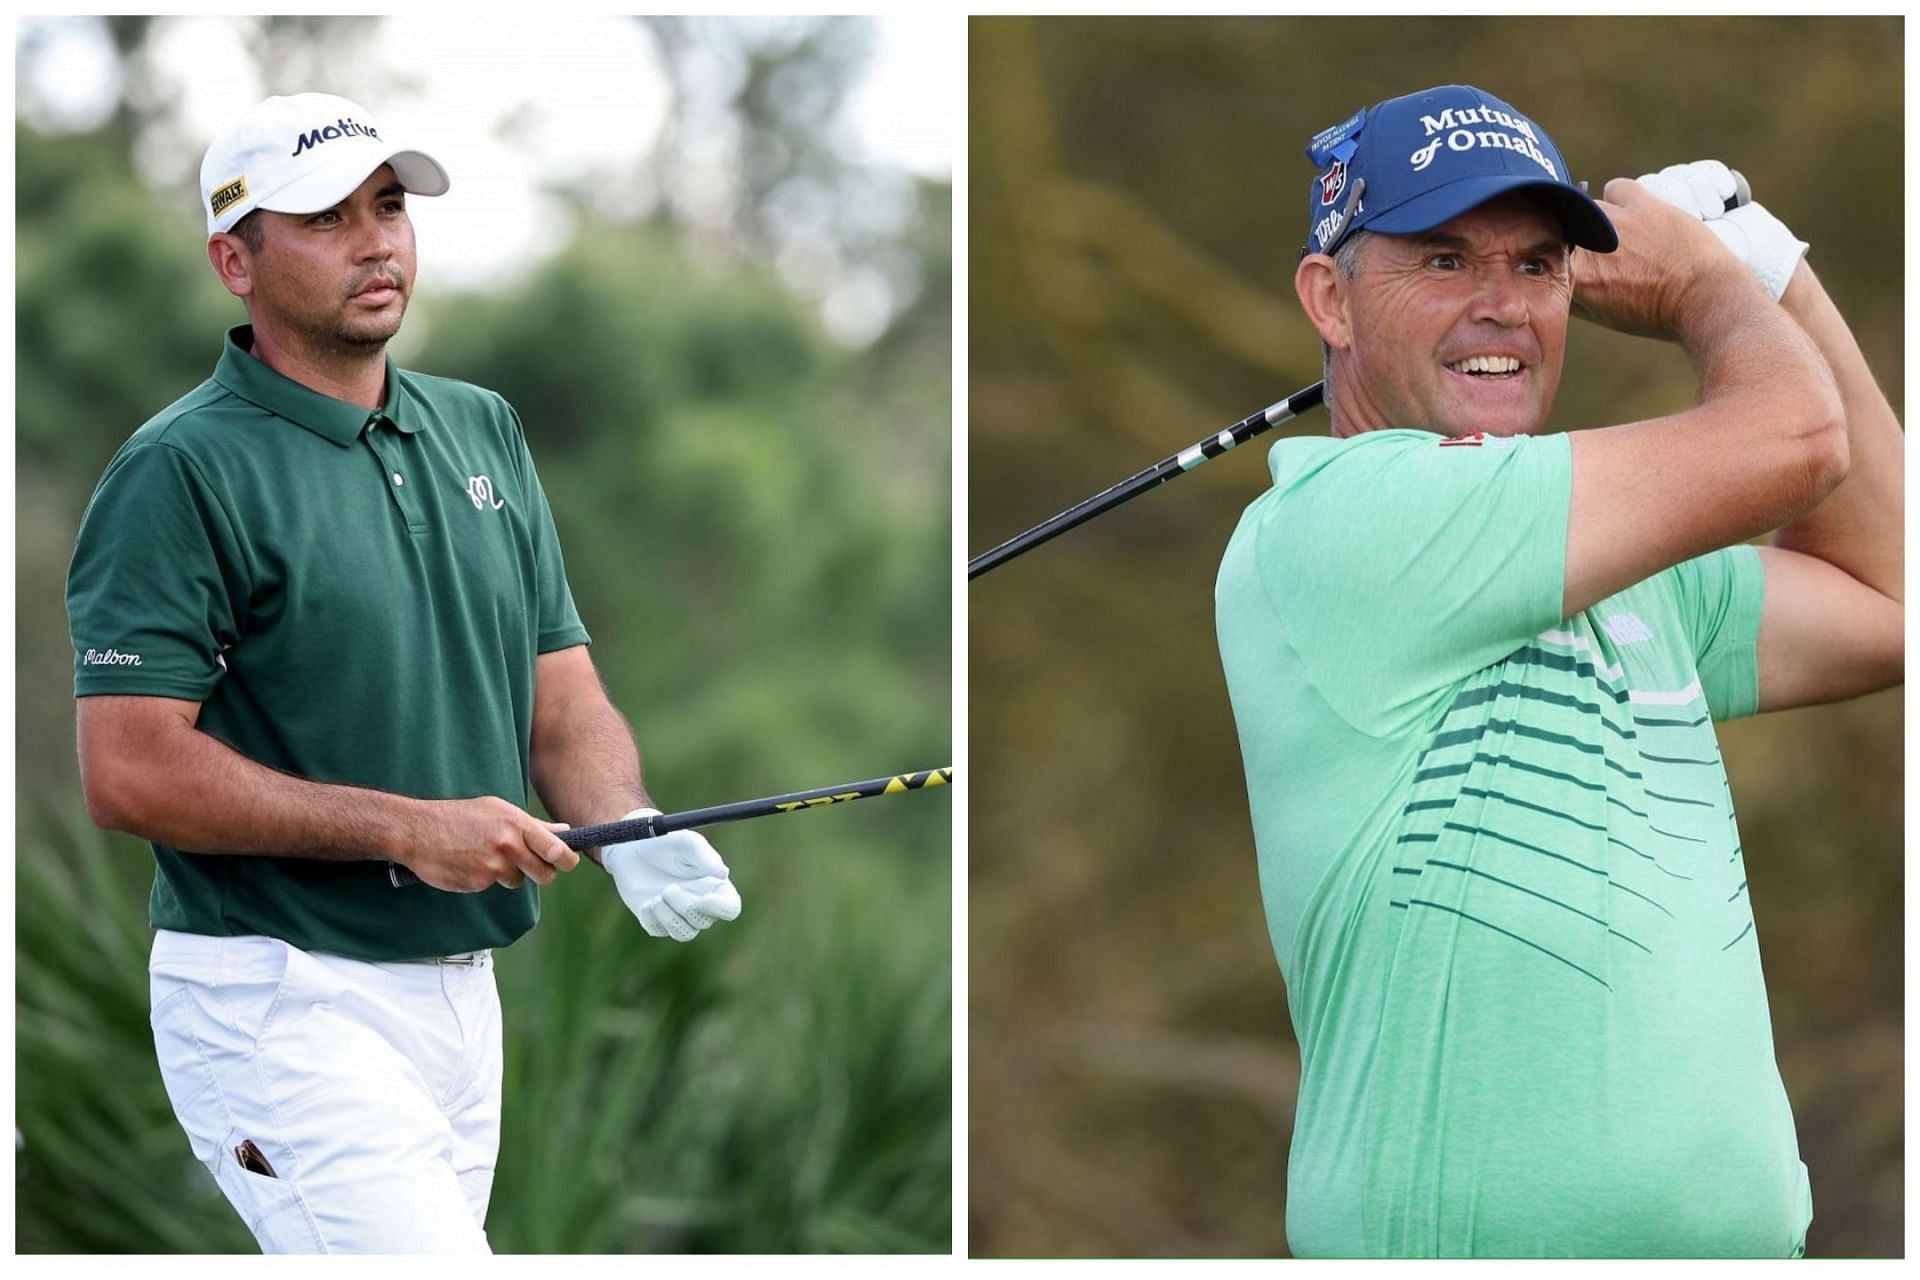 Jason Day and Padraig Harrington were among the top names to miss the cut at the Texas Children